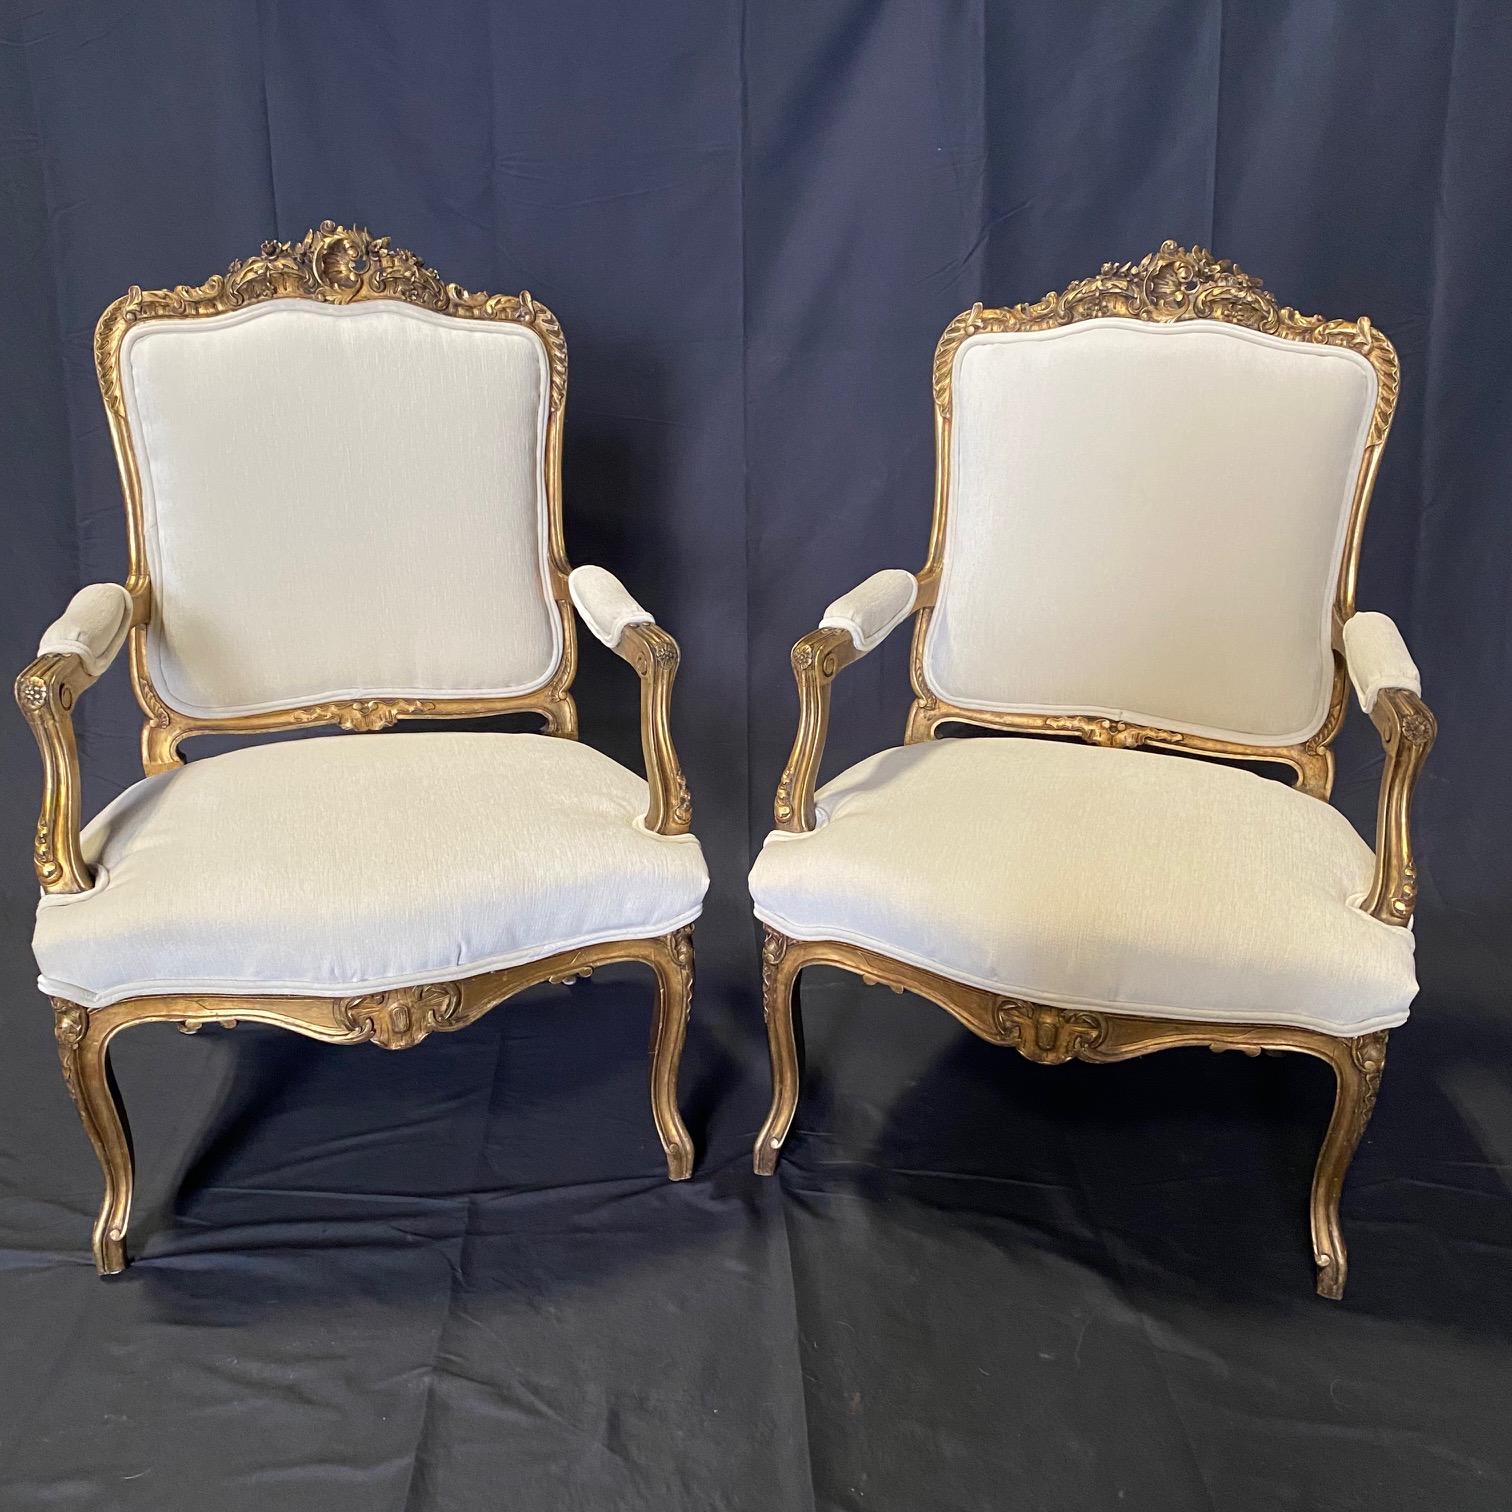  Pair of Antique French Louis XV Fauteuil Gilded Arm Chairs  7